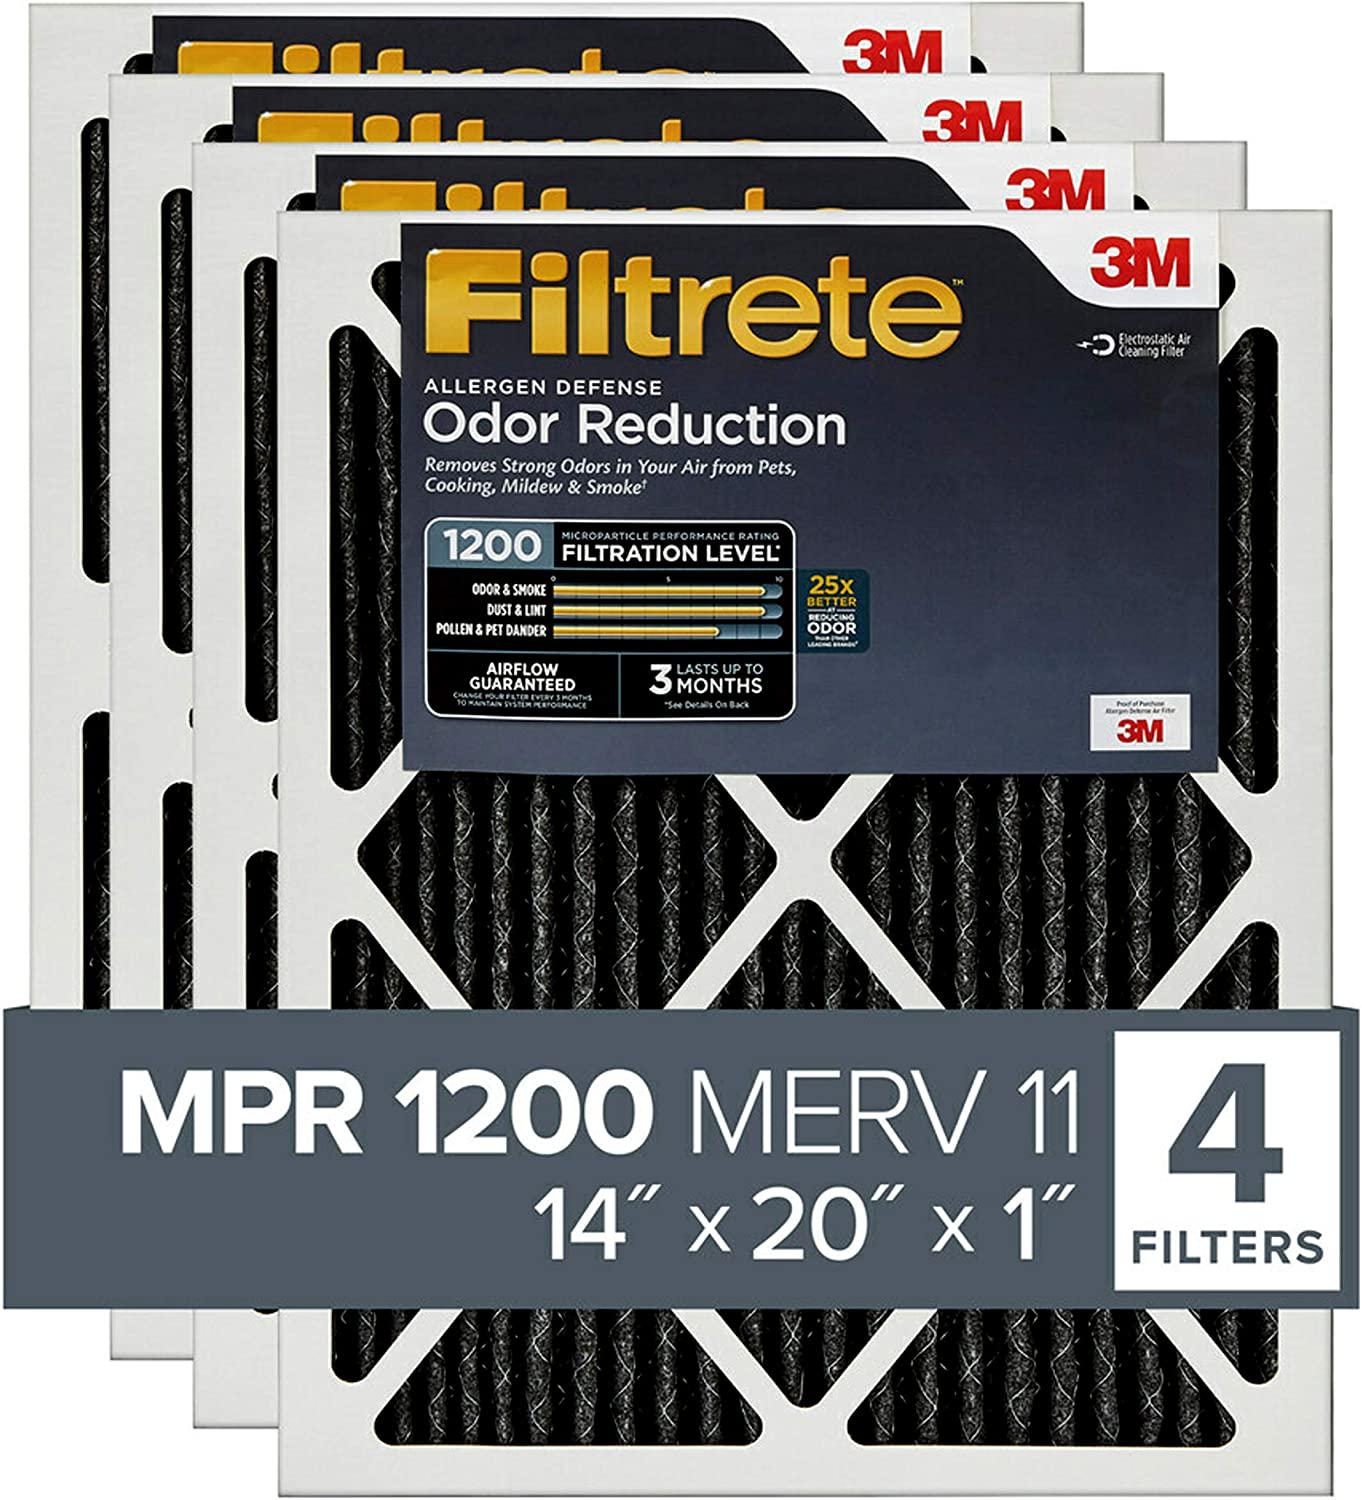 Filtrete, Filtrete HOME05-4 14x20x1, MPR 1200, 4-Pack (Exact Dimensions 13.81 x 19.81 x 0.81), Allergen Defense Odor Reduction AC Furnace Air Filter, Black, 4 Count